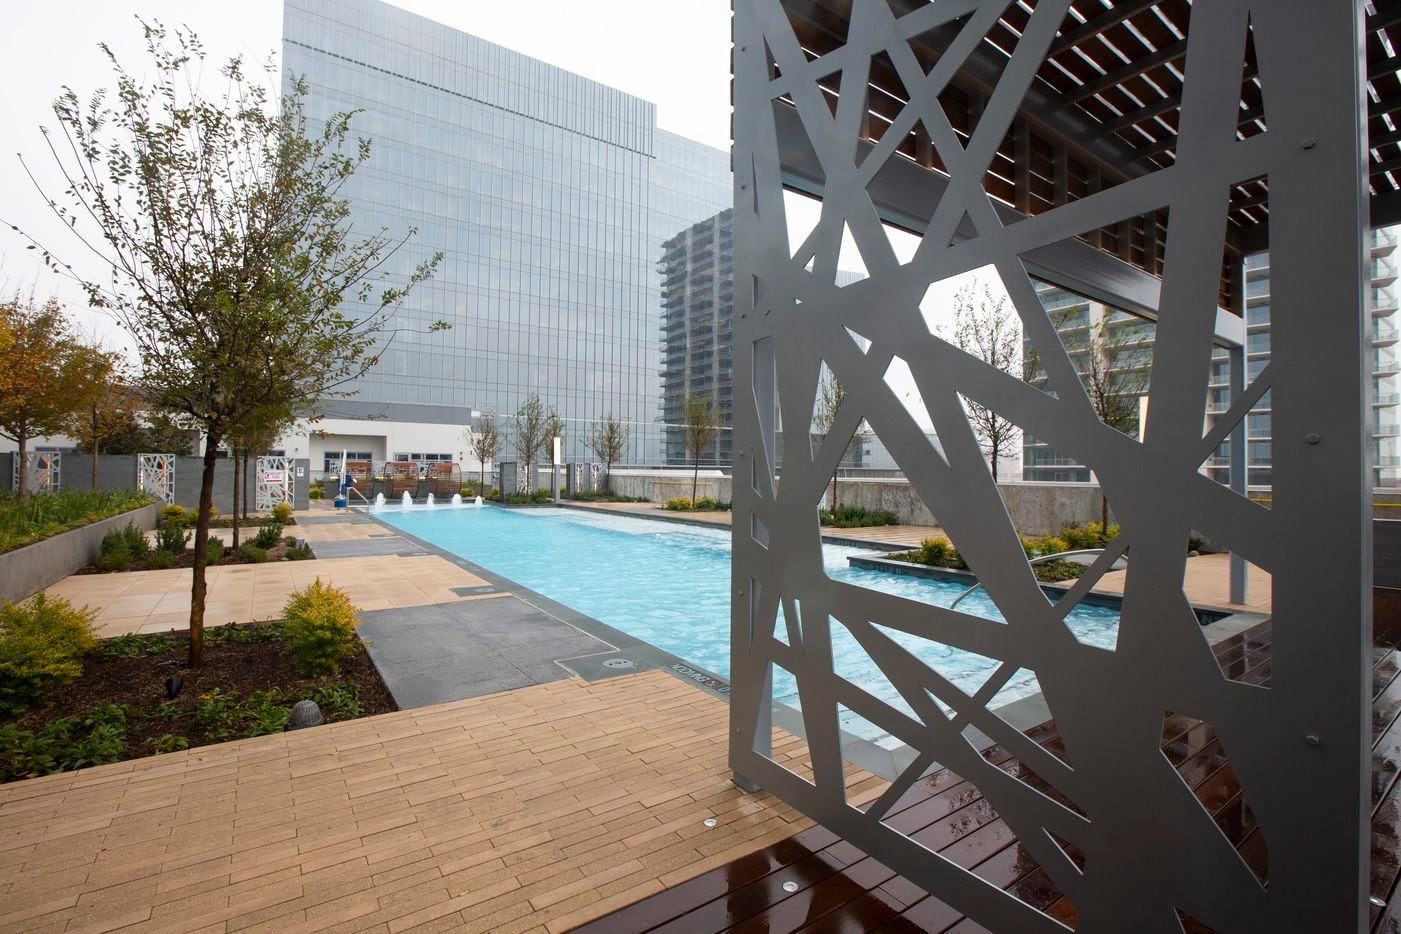 The eighth-floor pool deck the new LVL29 apartment high-rise in Plano on Tuesday, Nov. 5,...